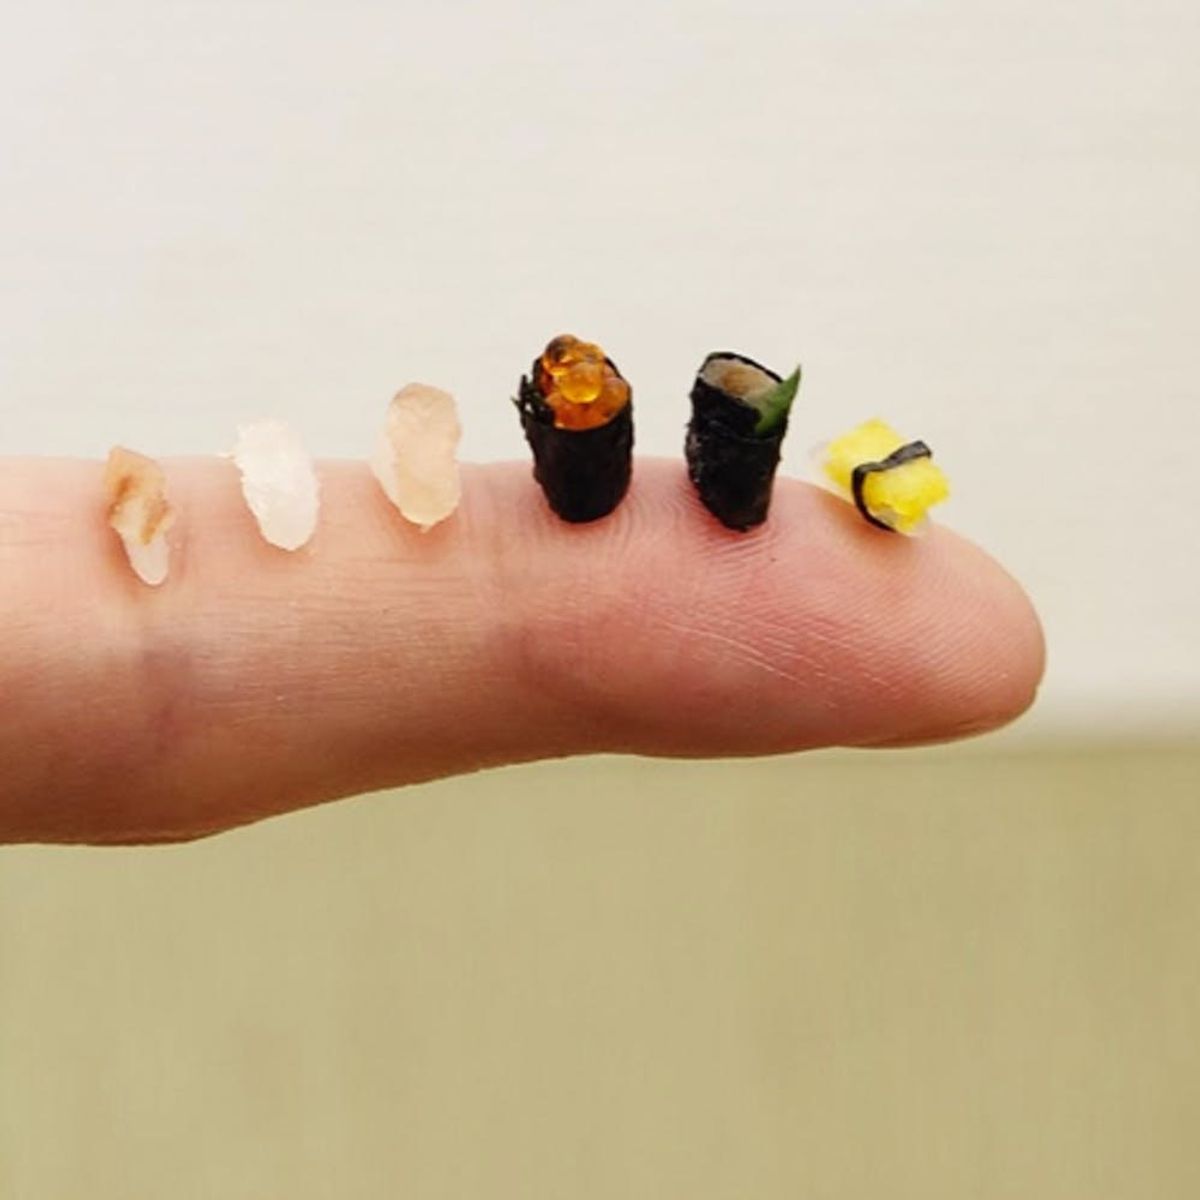 WTF: Tiny Food Tutorials Are a (Really Cute) Thing